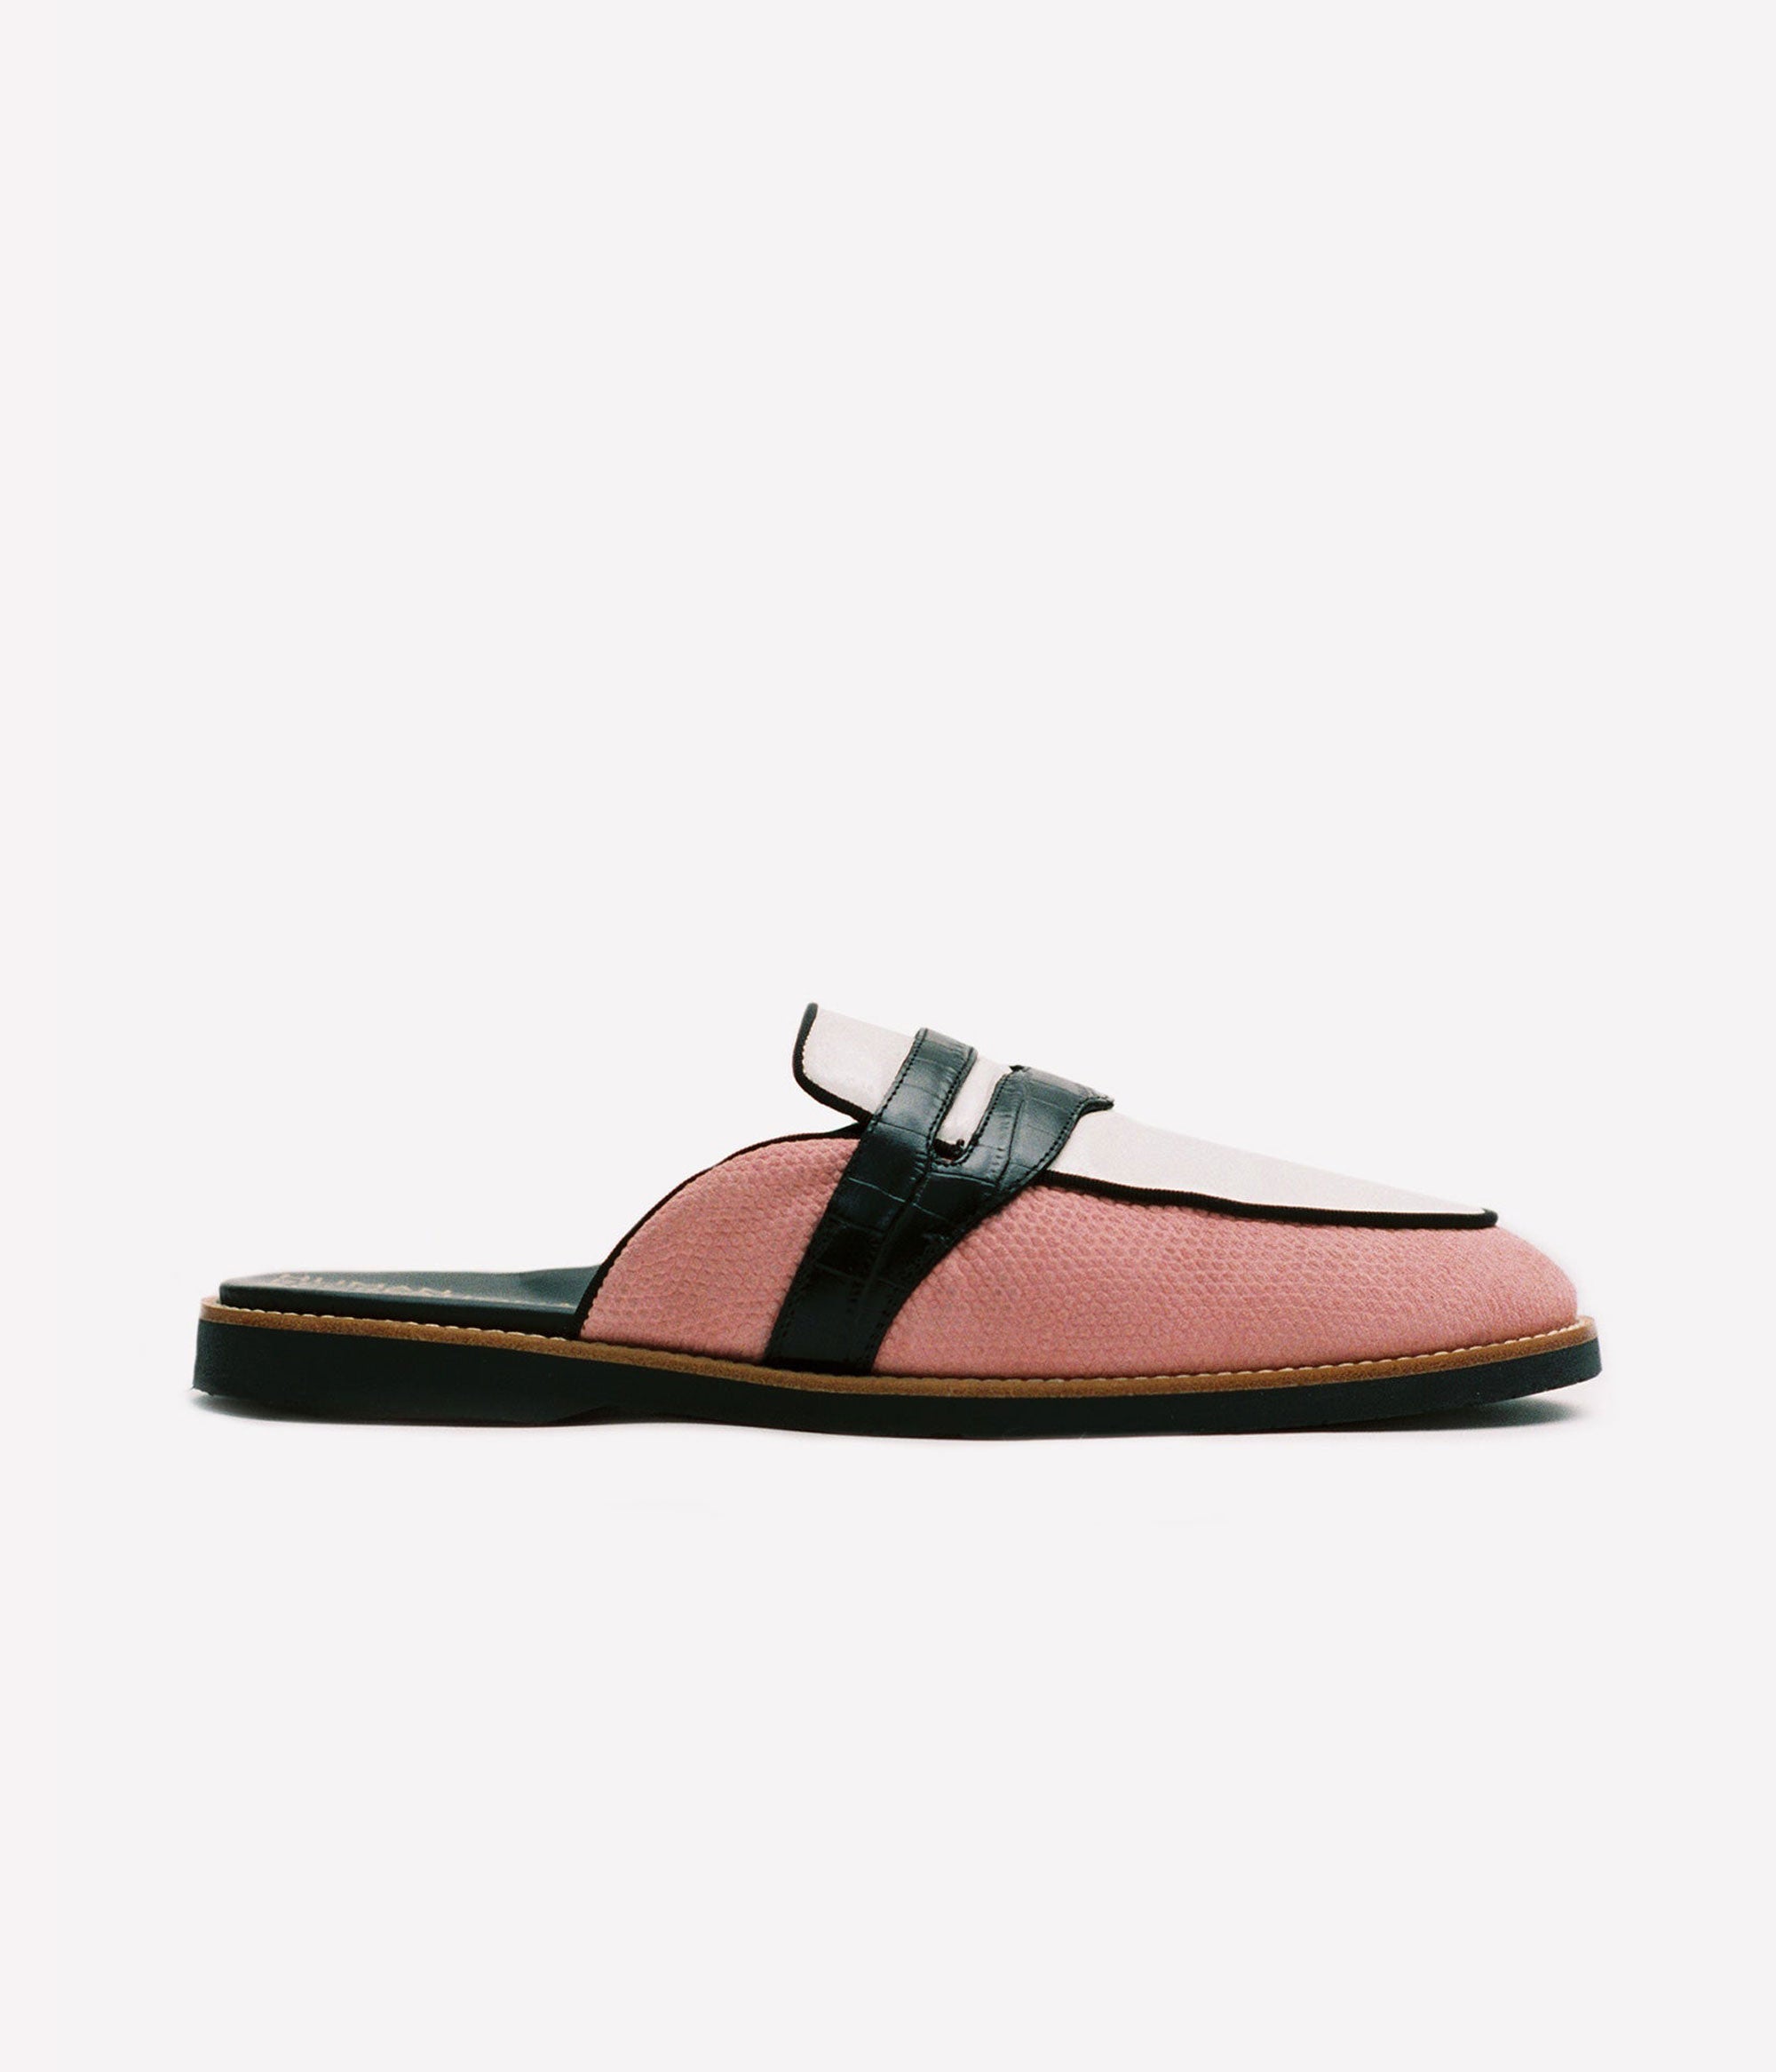 HUMAN RECREATIONAL SERVICES PALAZZO SLIPPER IN PINK BONE AND BLACK MADE WITH ITALIAN CALF SKIN